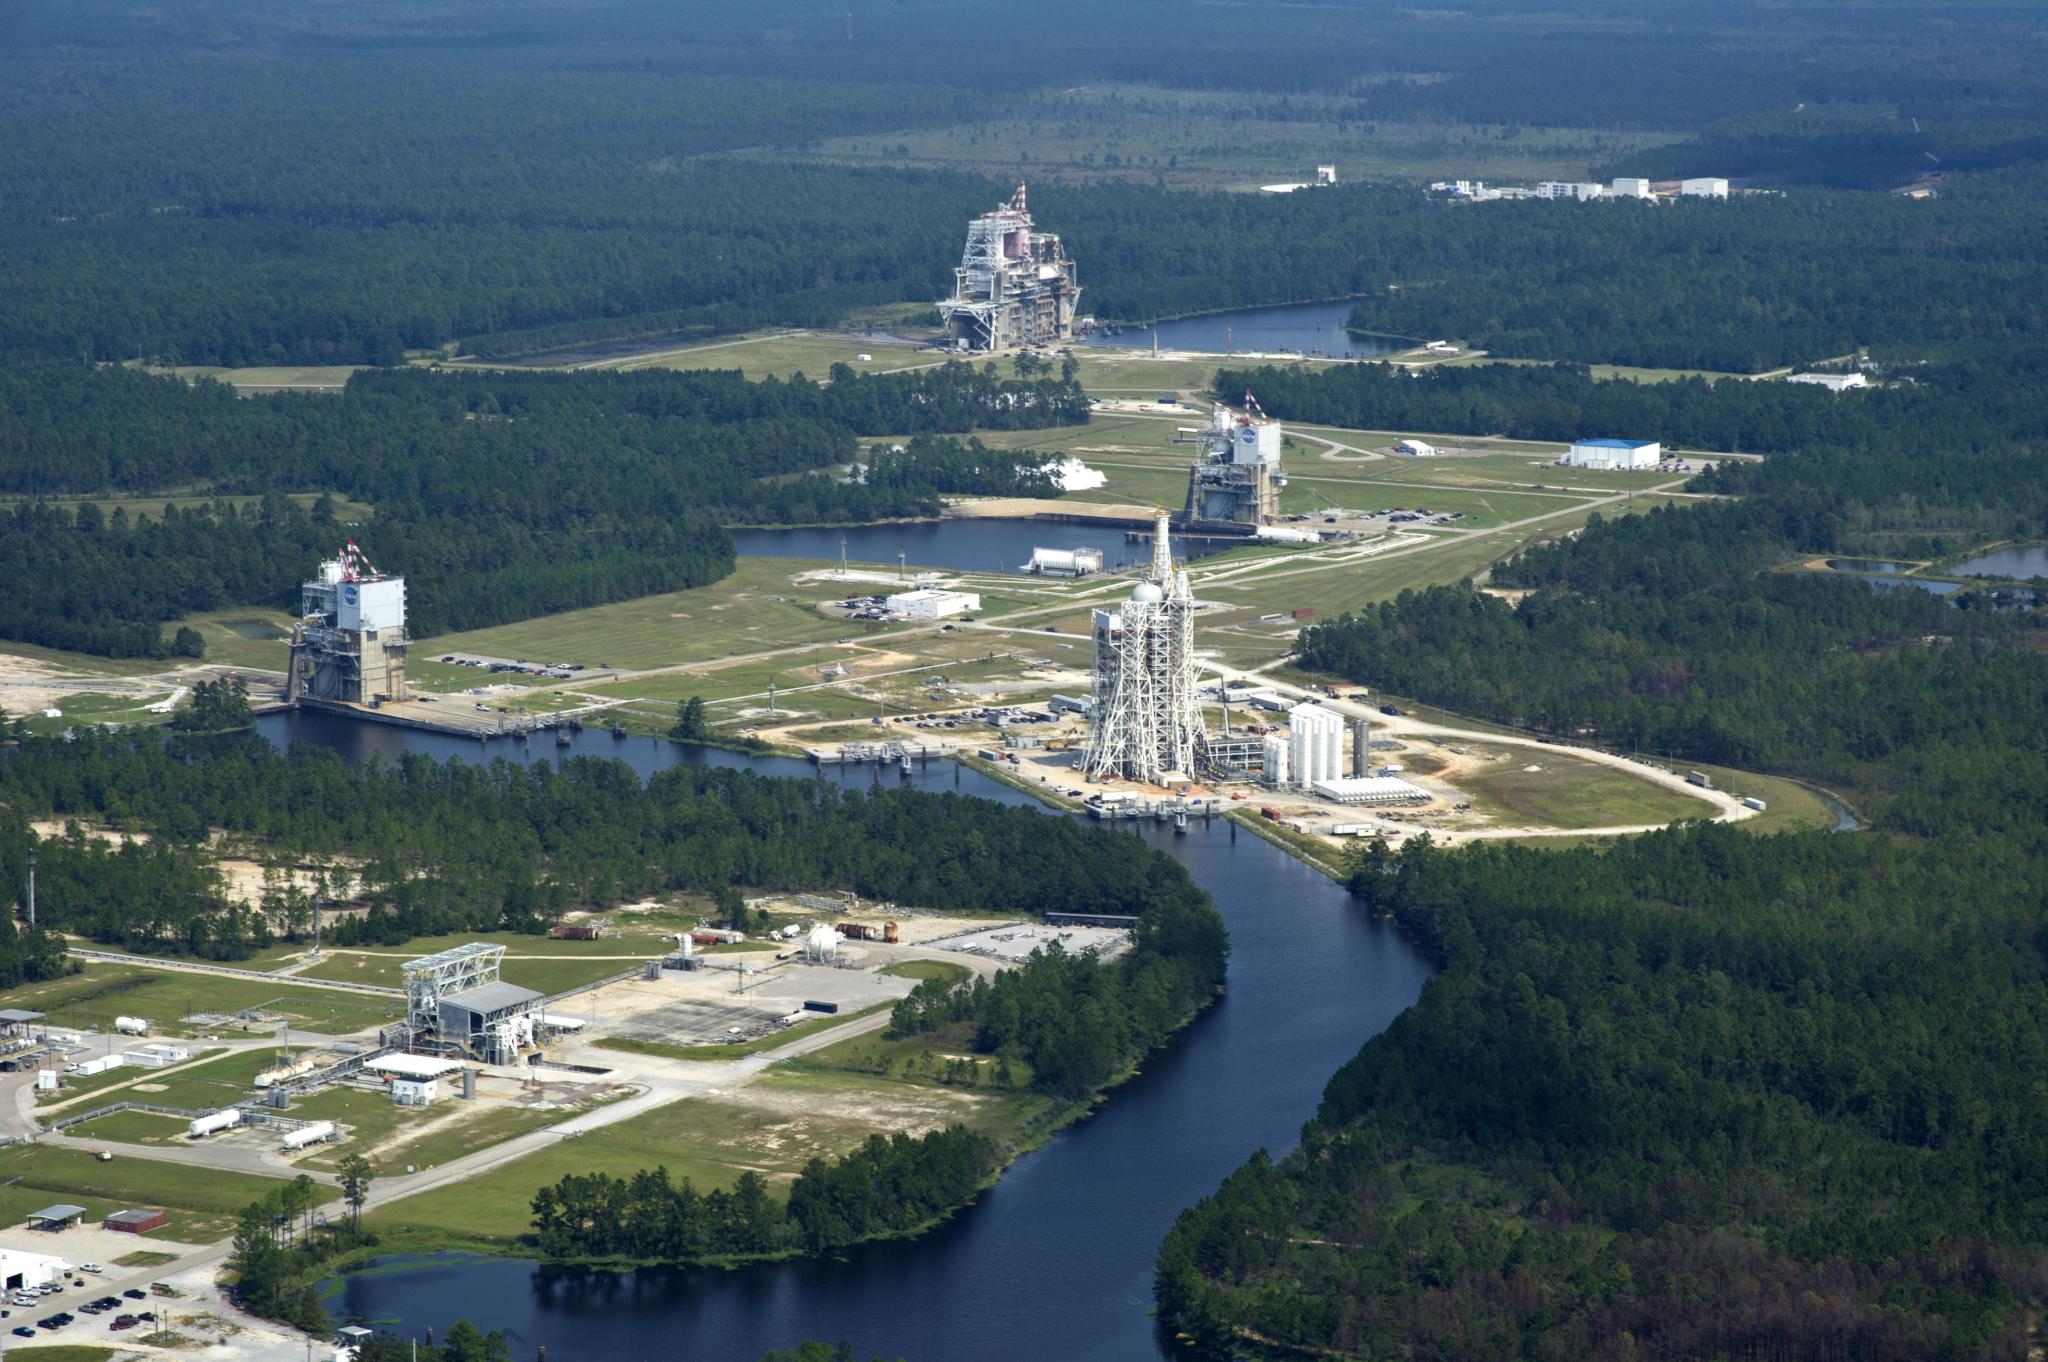 Aerial view of Stennis Space Center Test Complex; E Test Complex (foreground) and A Test Complex (background)